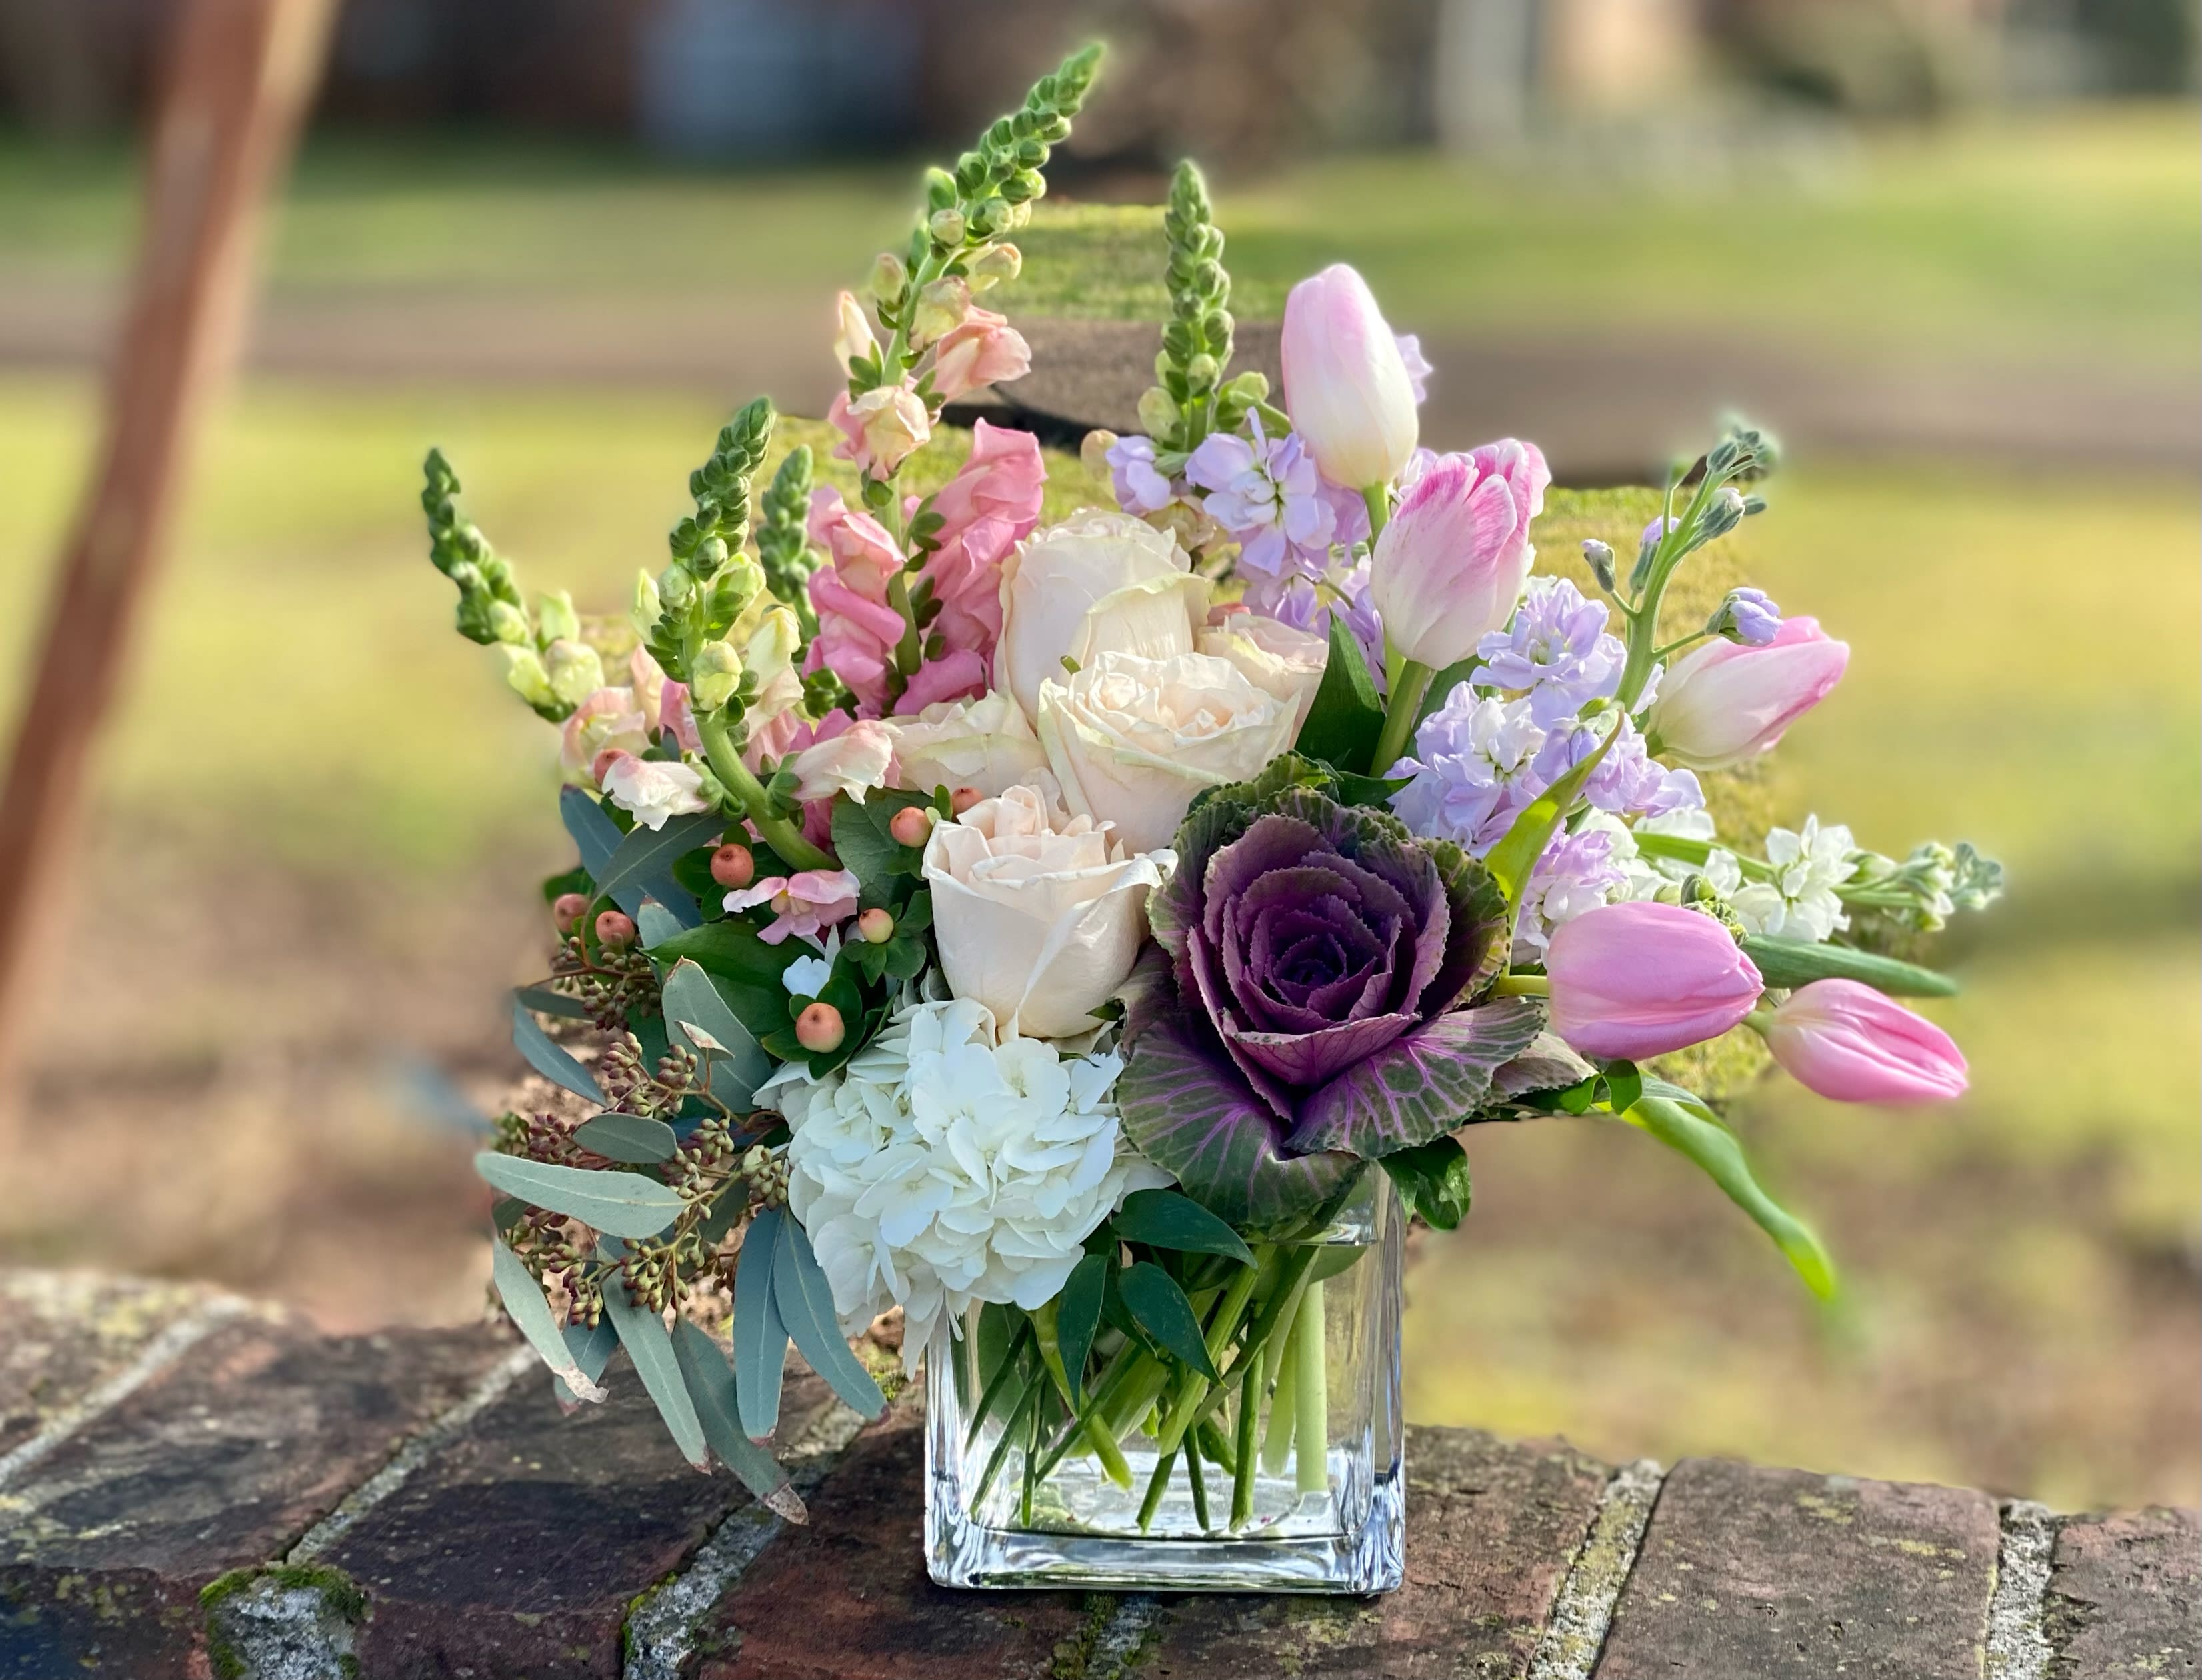 Adoring Devotion - Delight in an arrangement full of soft beauty and elegance. Cream roses are cradled by blushing pink flowers peach hypericum and ornamental greens. Cherish them always with a delicate expression of caring and joy.